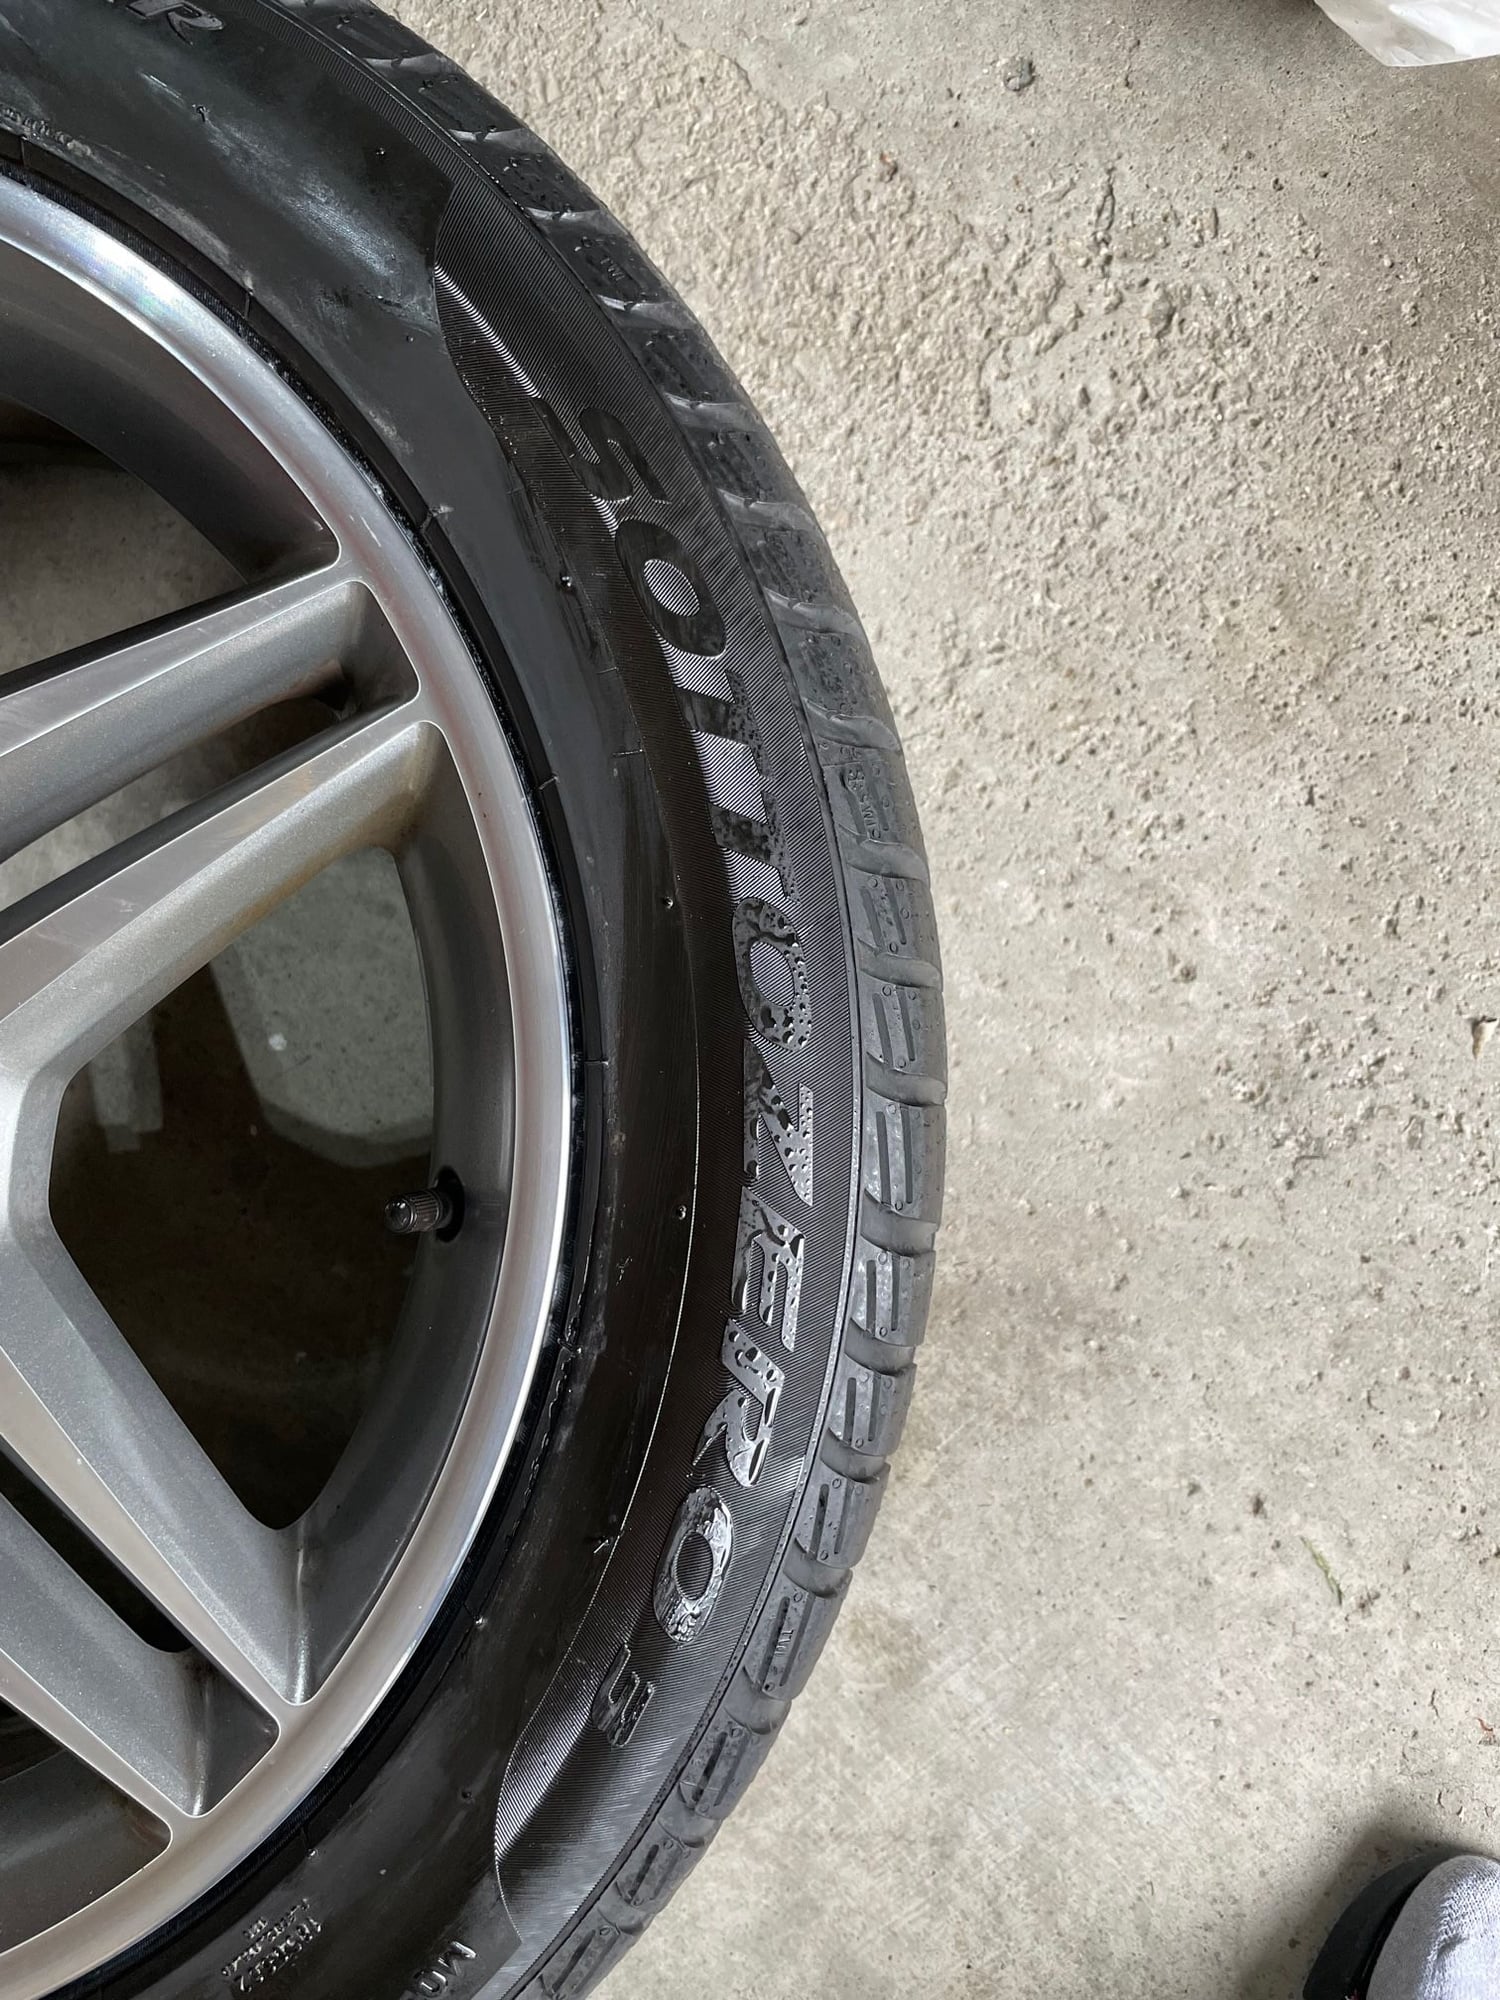 Wheels and Tires/Axles - Used Pirelli SottoZero3 Winter Tires Mounted on AMG Rims for Sale (OEM) - Used - Burlington, ON, Canada